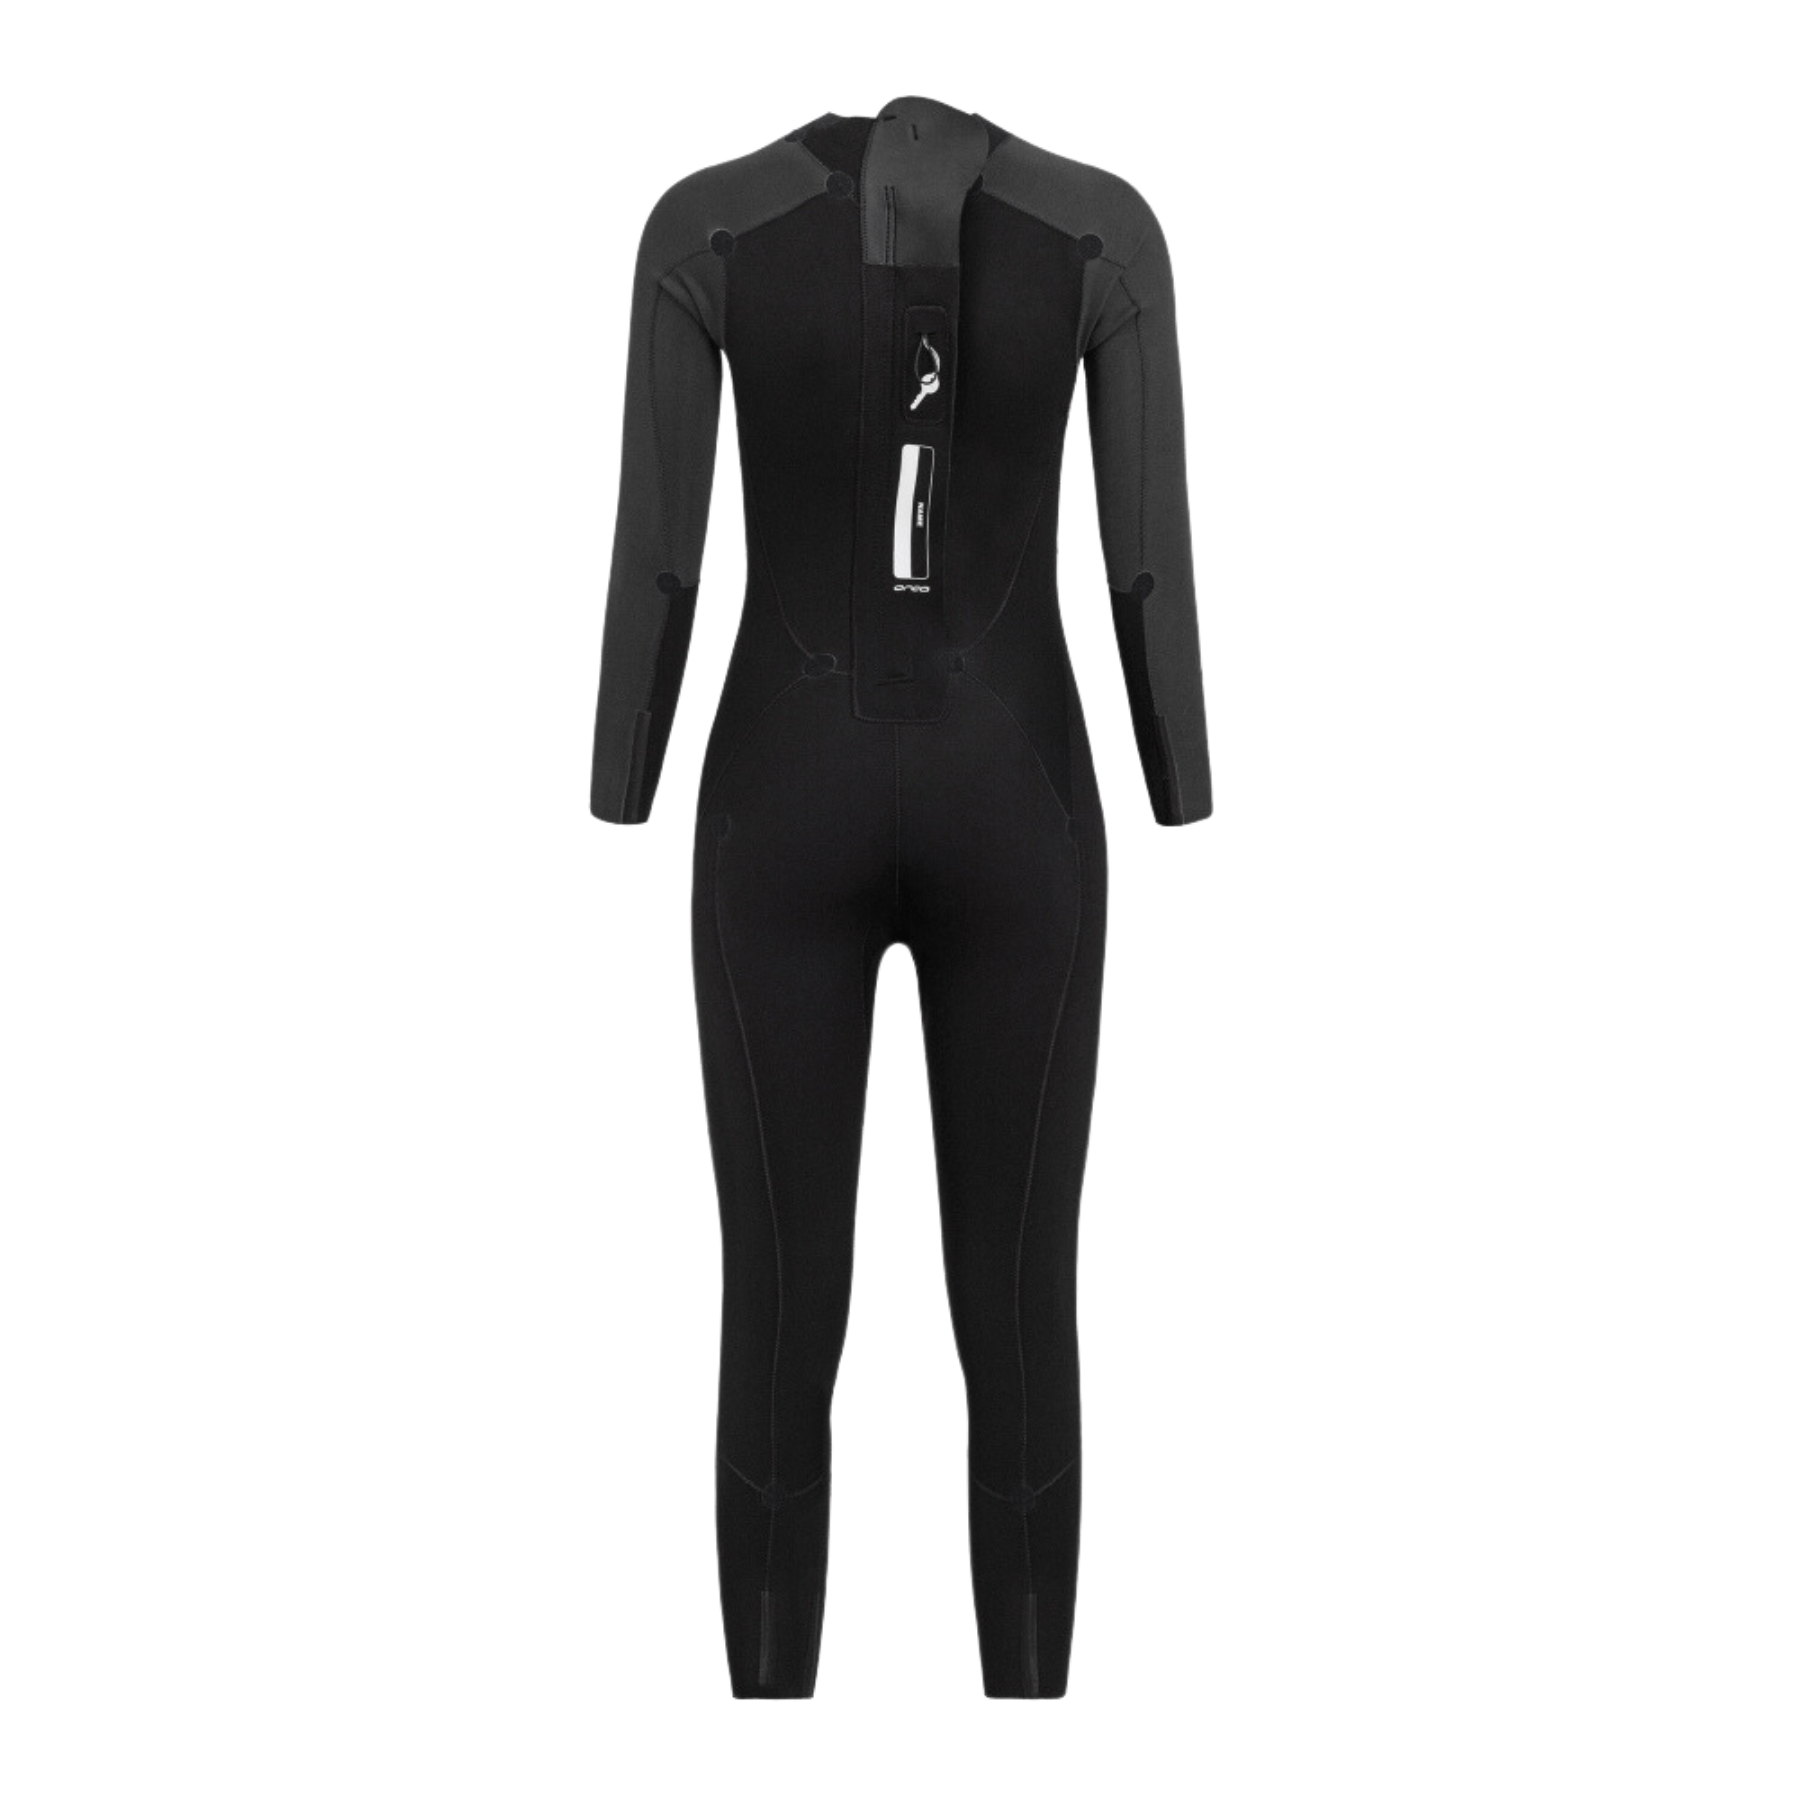 Orca Vitalis Openwater Core TRN Womens Wetsuit